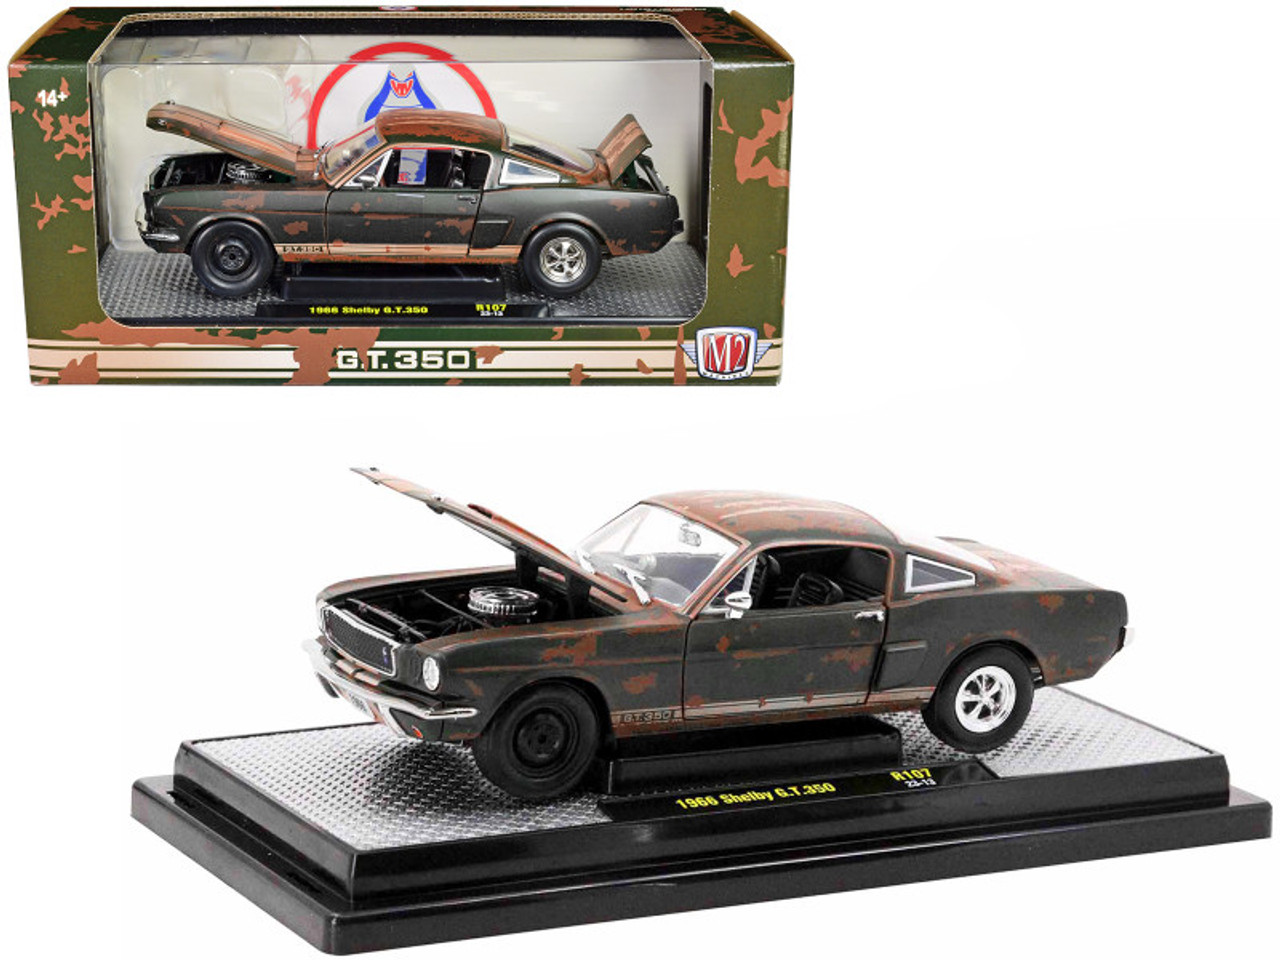 1966 Ford Shelby GT350 Ivy Green with Wimbledon White Stripes (Rusted) Limited Edition to 5250 pieces Worldwide 1/24 Diecast Model Car by M2 Machines